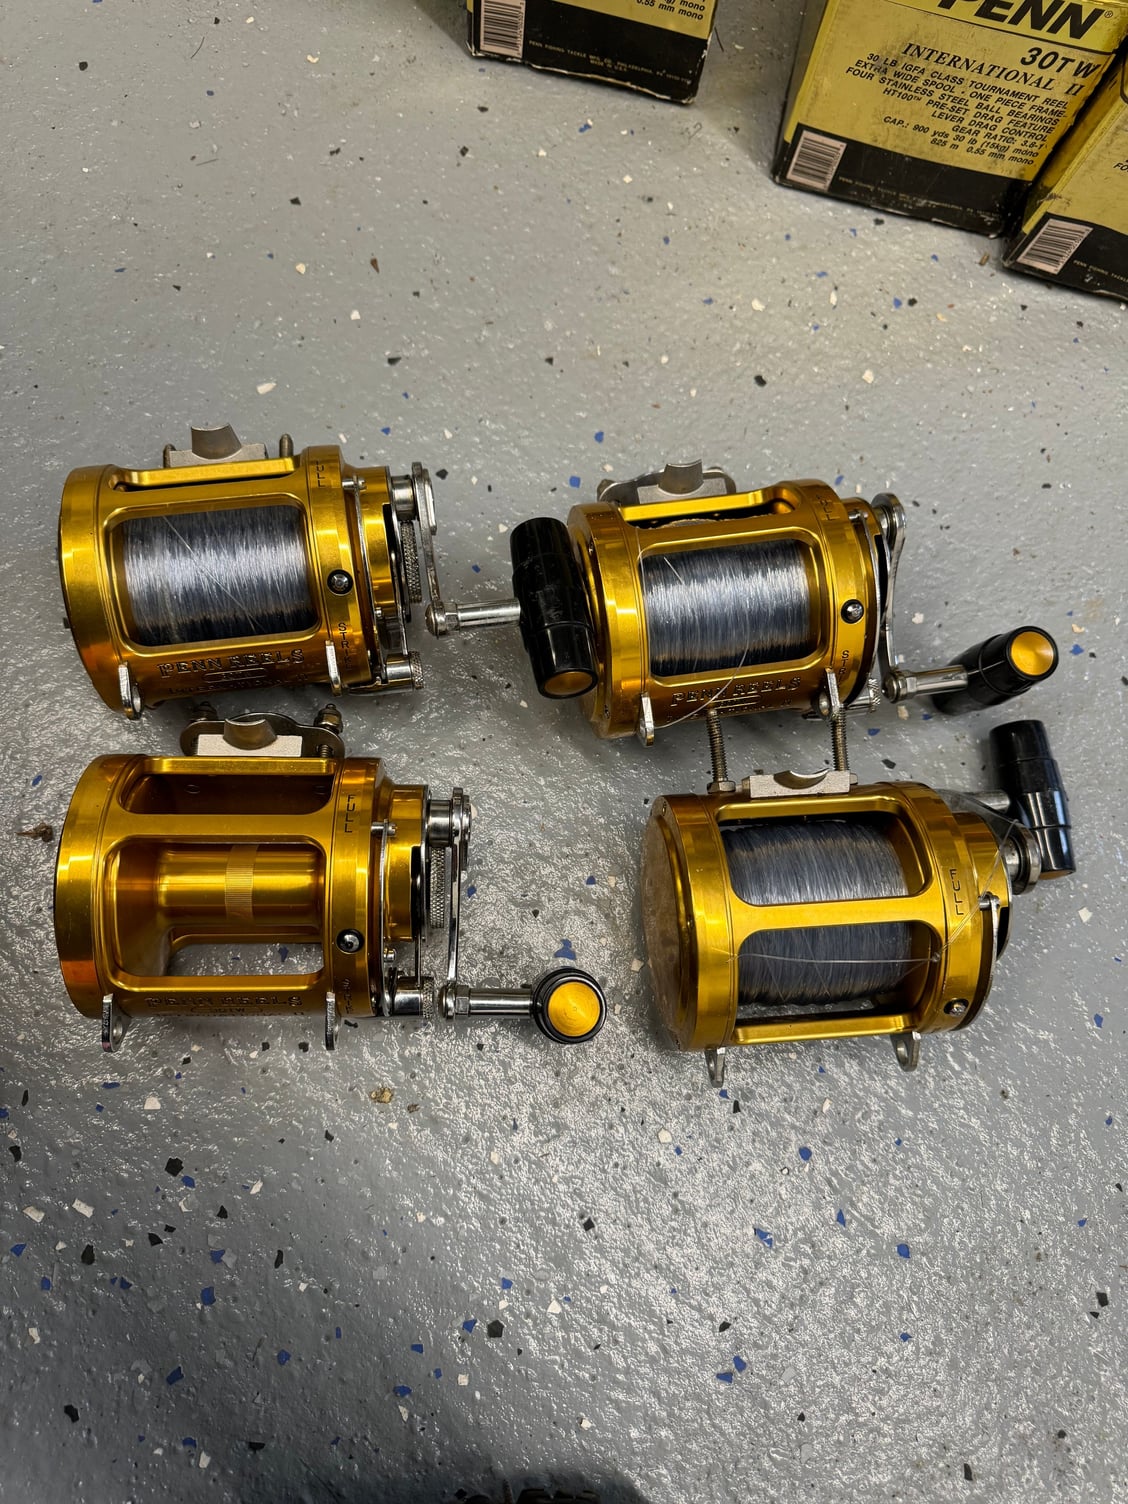 Penn reels for sale - The Hull Truth - Boating and Fishing Forum